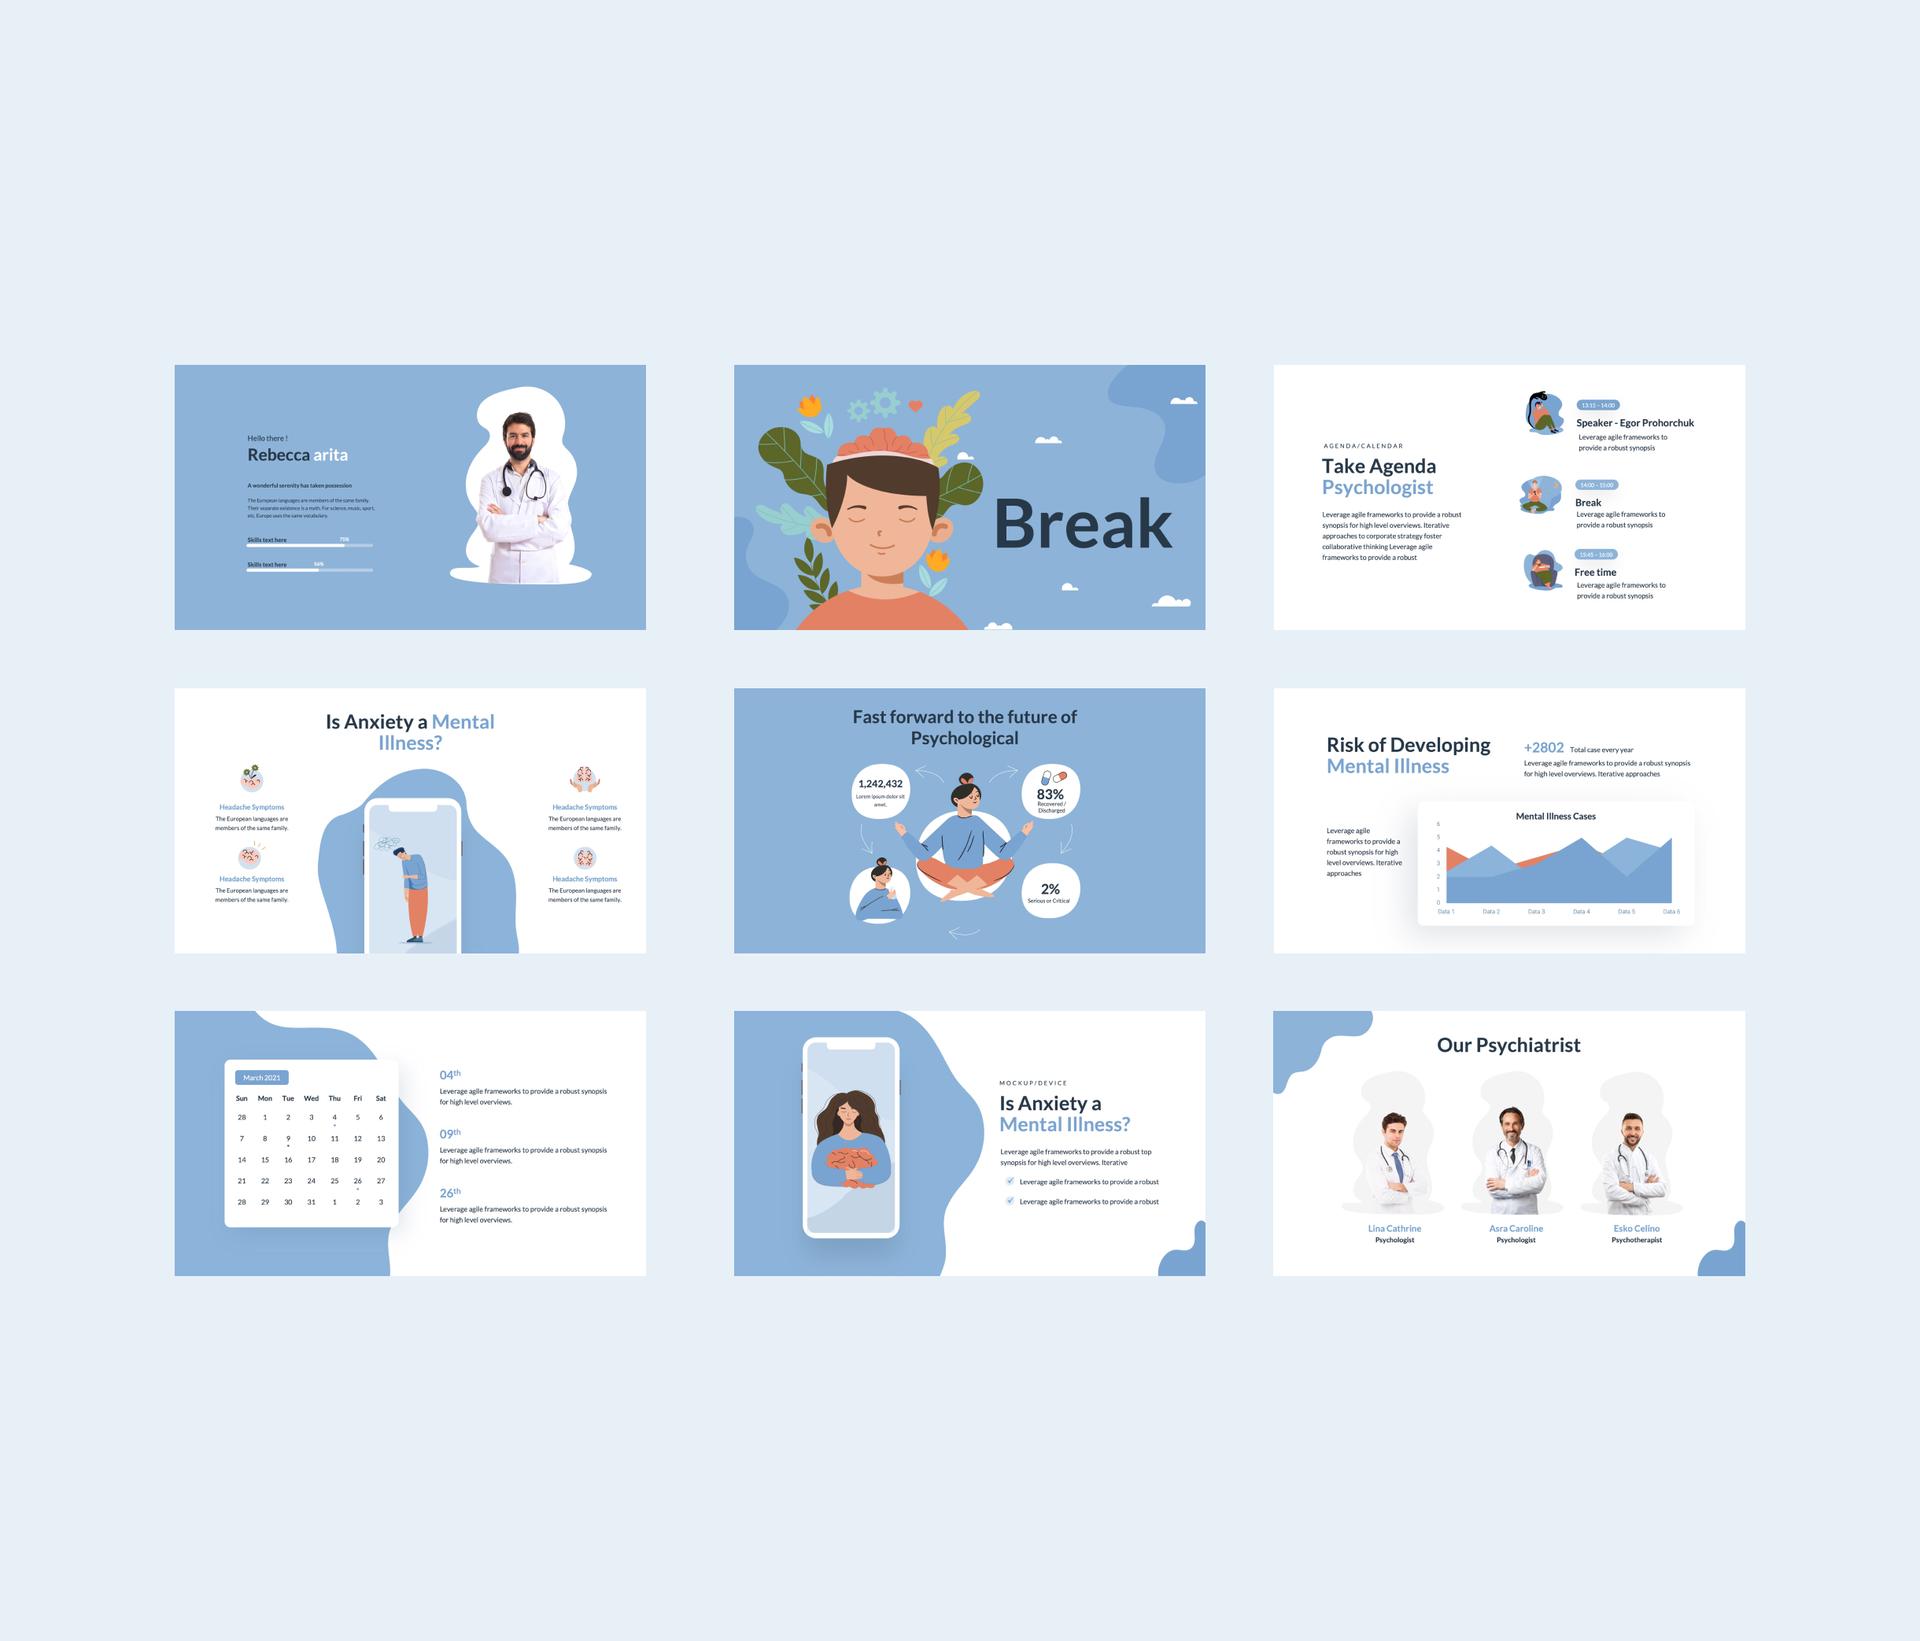 Mighty Minds - Mental Health Presentation Template.